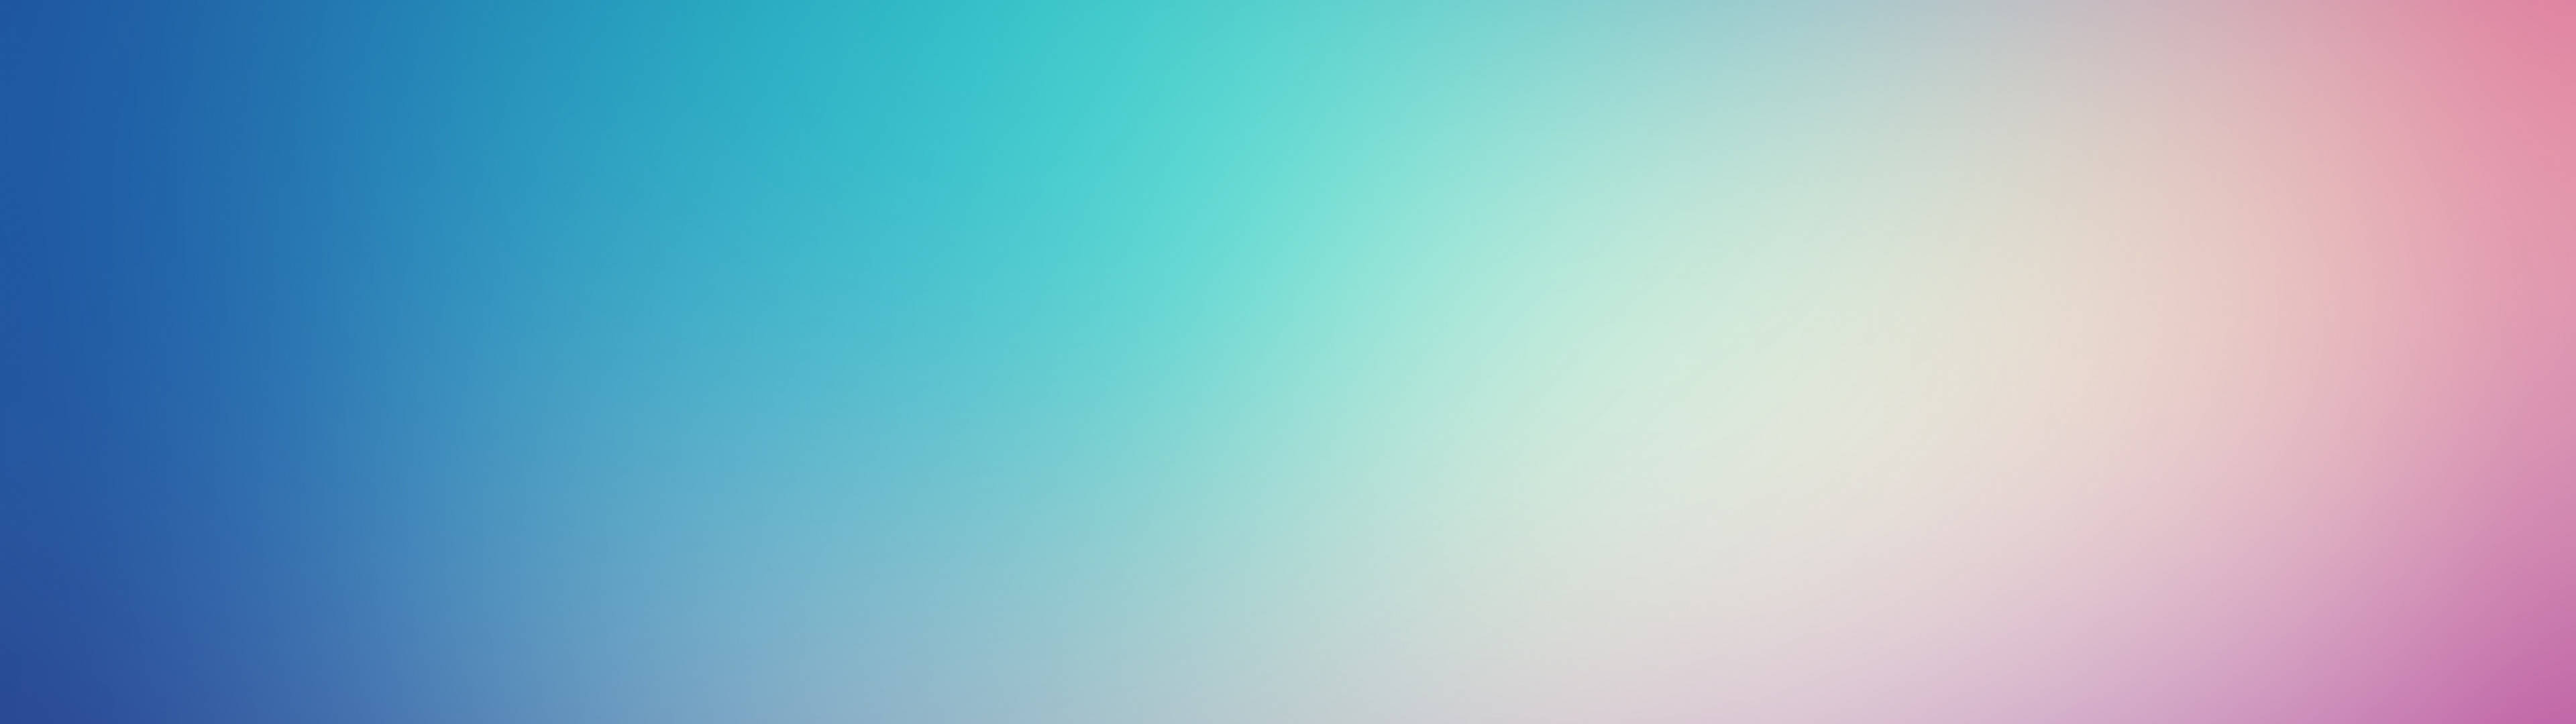 4d Ultra Hd Simple Teal Gradient Picture